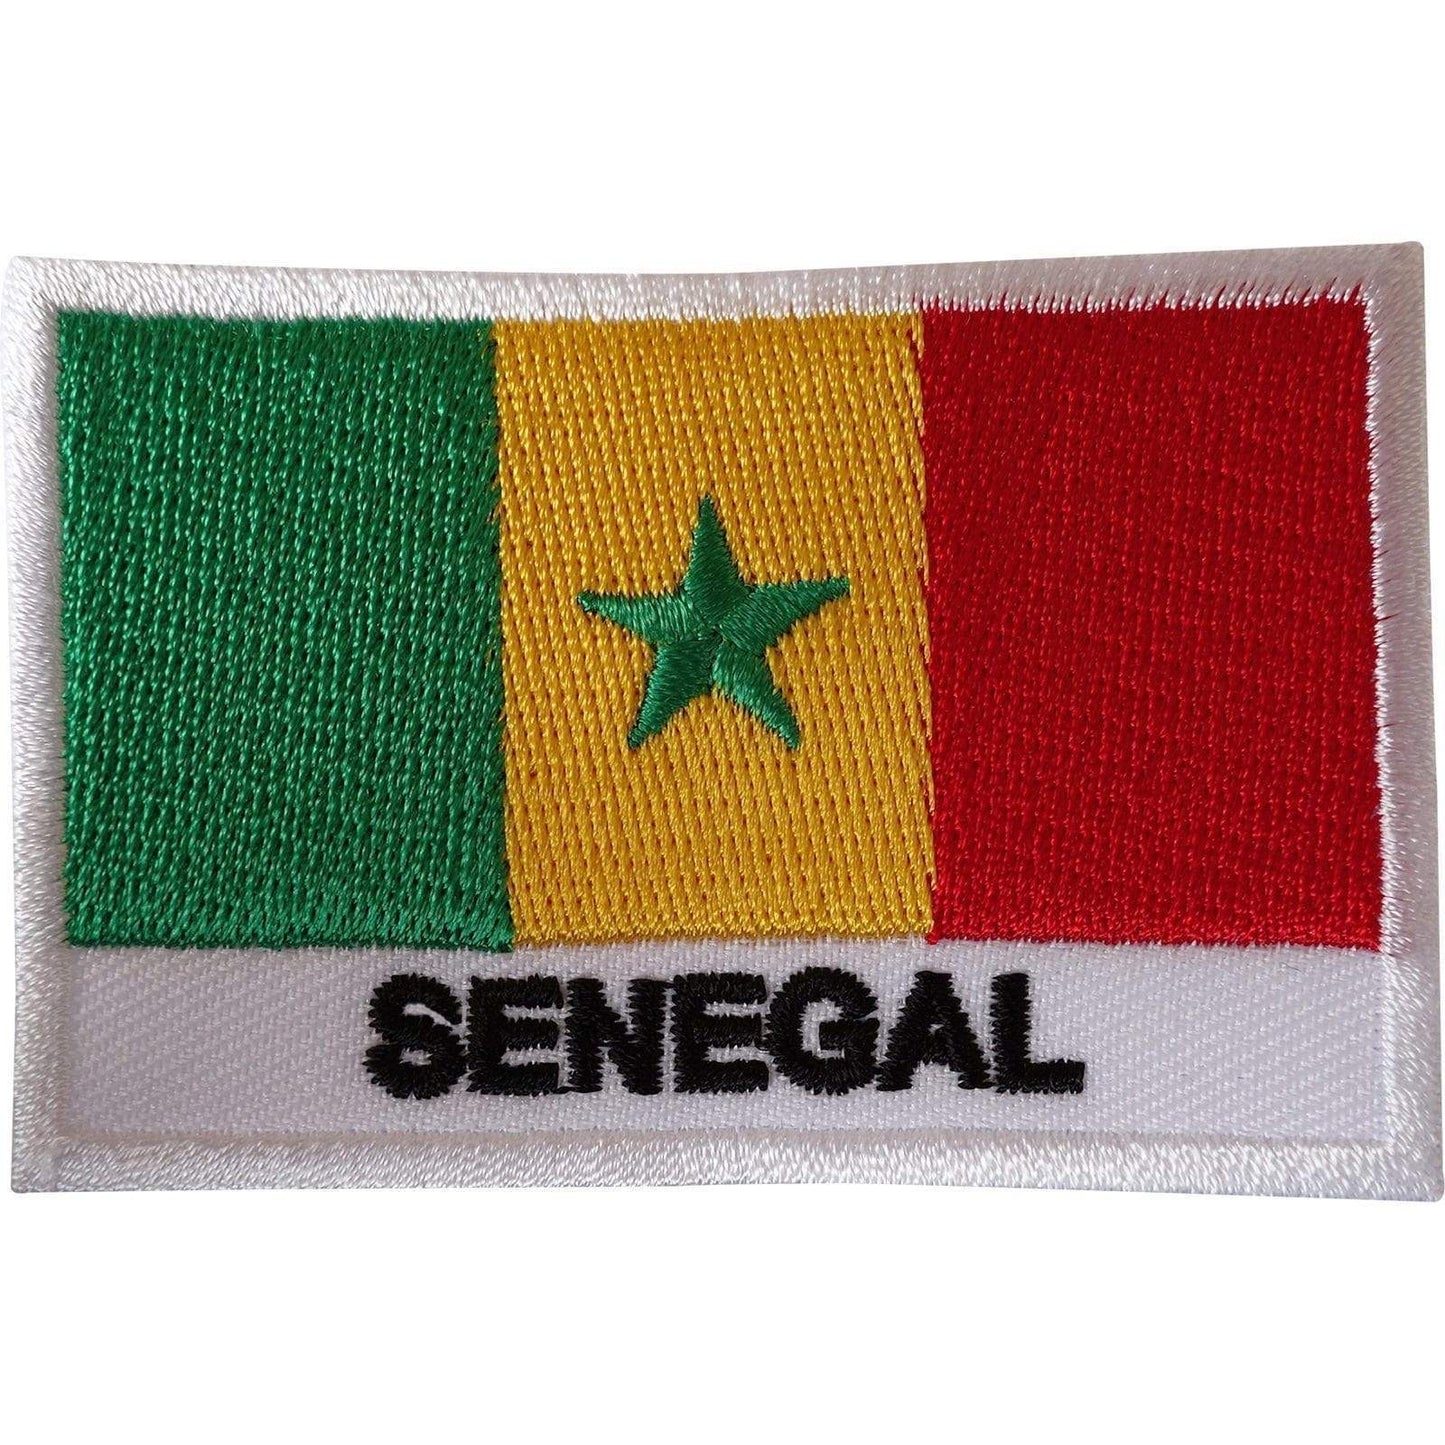 Senegal Flag Patch Sew On Clothes Jacket Bag Africa African Embroidered Badge